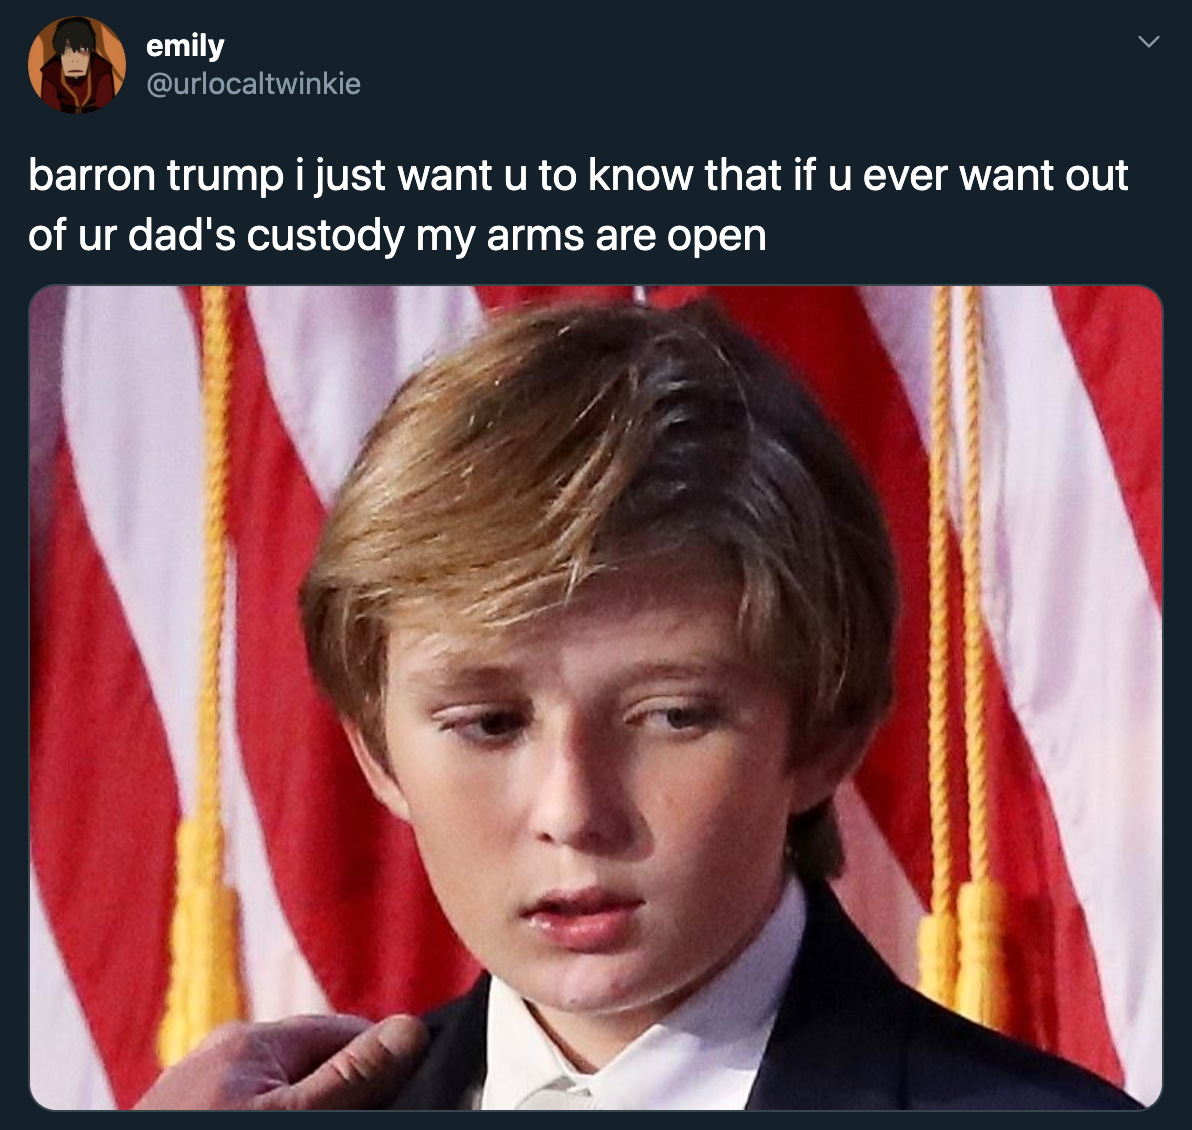 barron trump i just want u to know that if u ever want out of ur dad's custody my arms are open